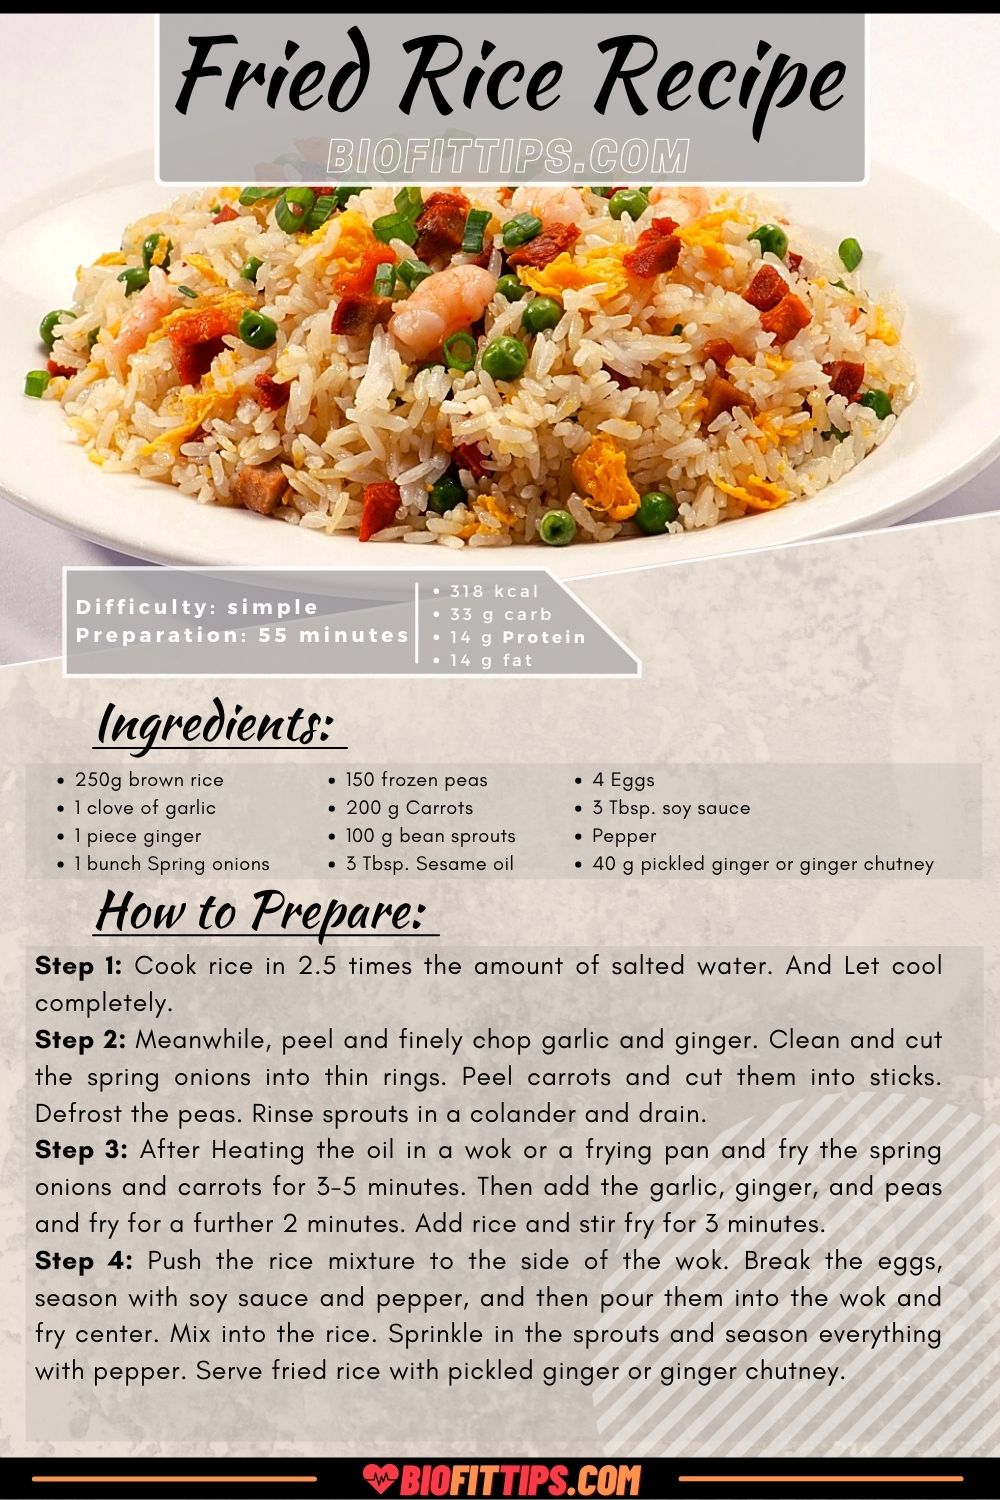 The Best Fried Rice Recipe In The World - BioFitTips